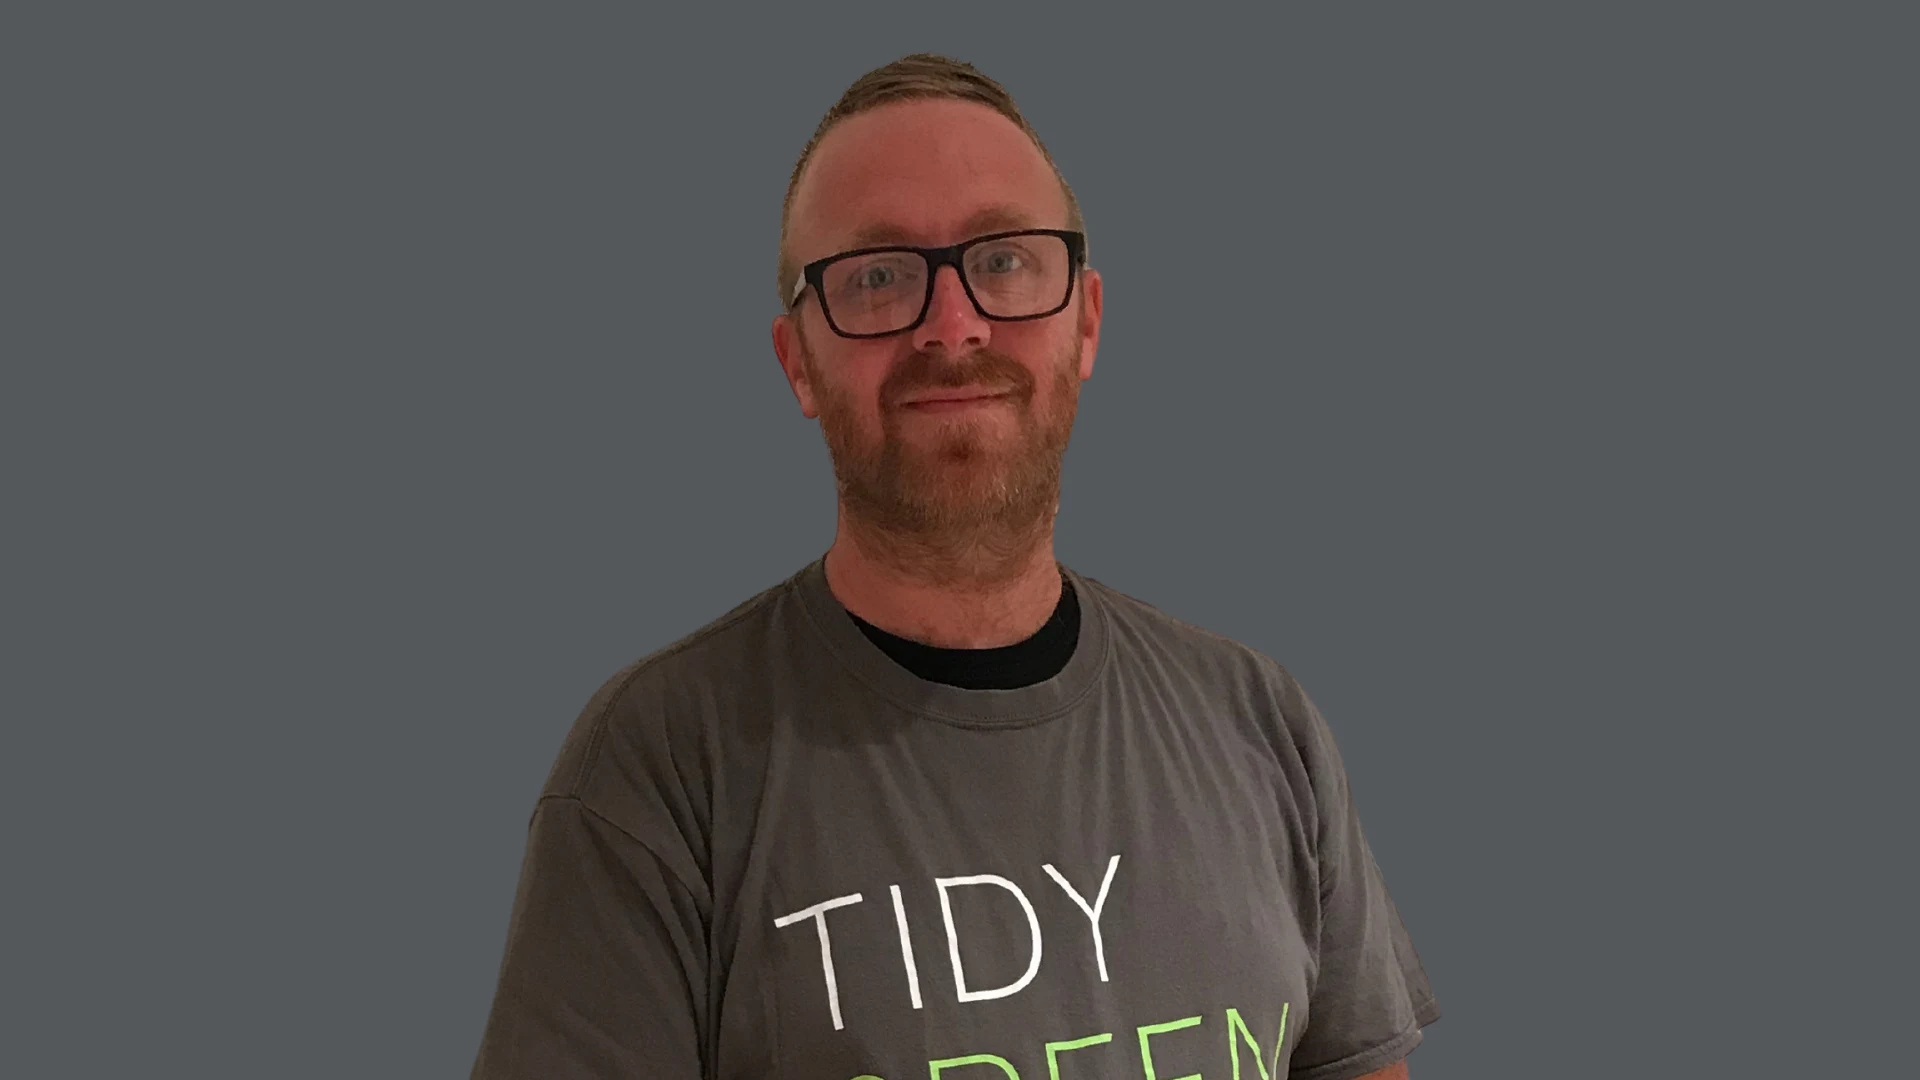 ryan from tidy green clean forth valley